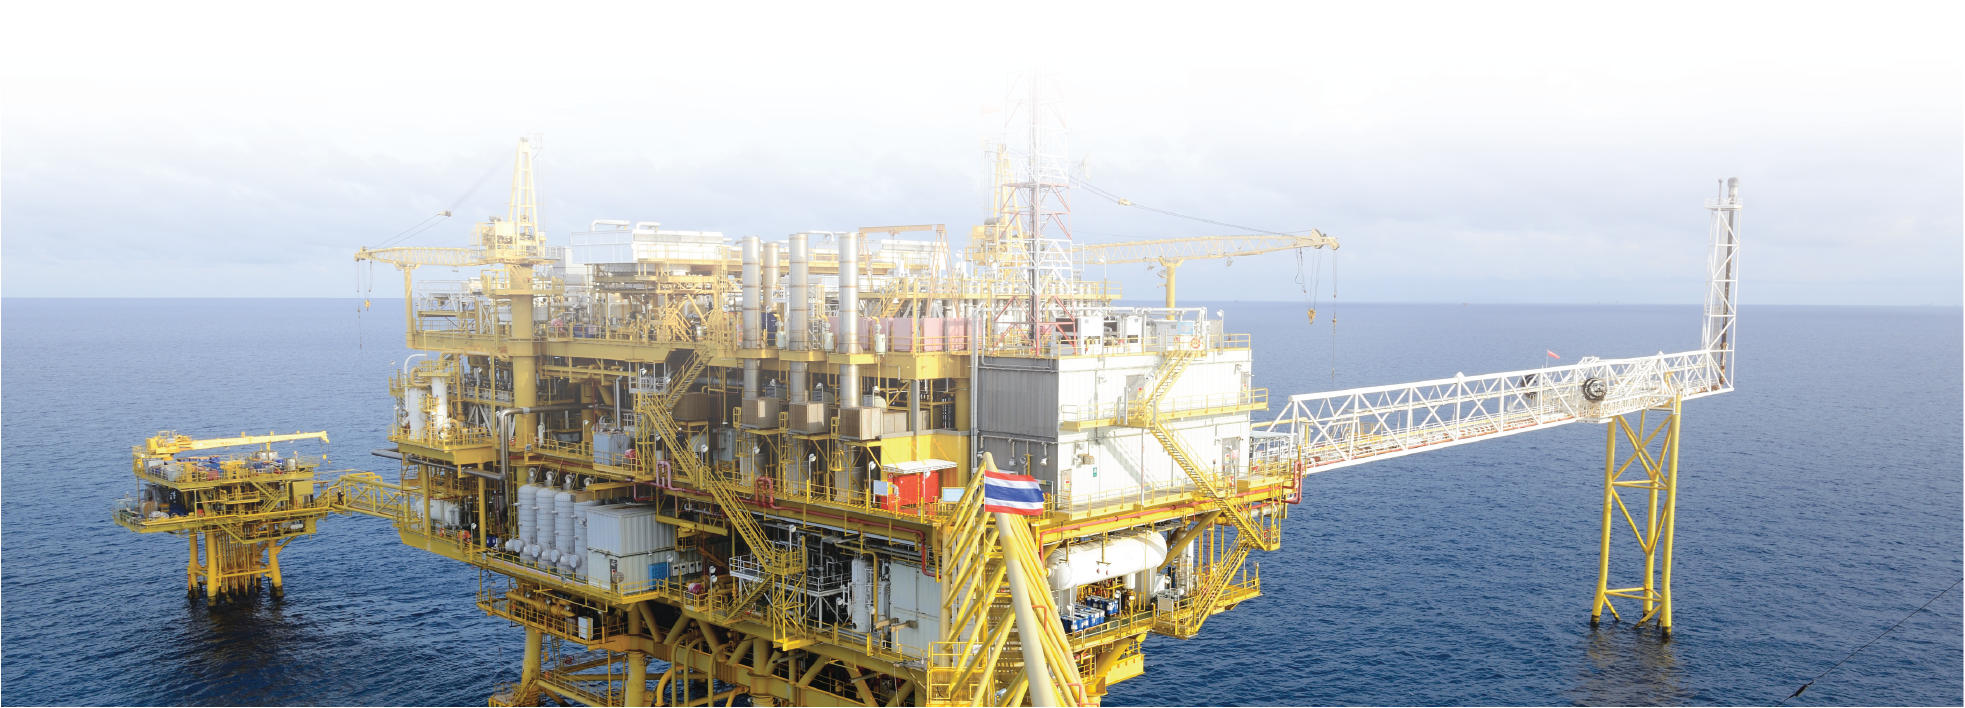 offshore oil drilling platform equipped with winch brakes